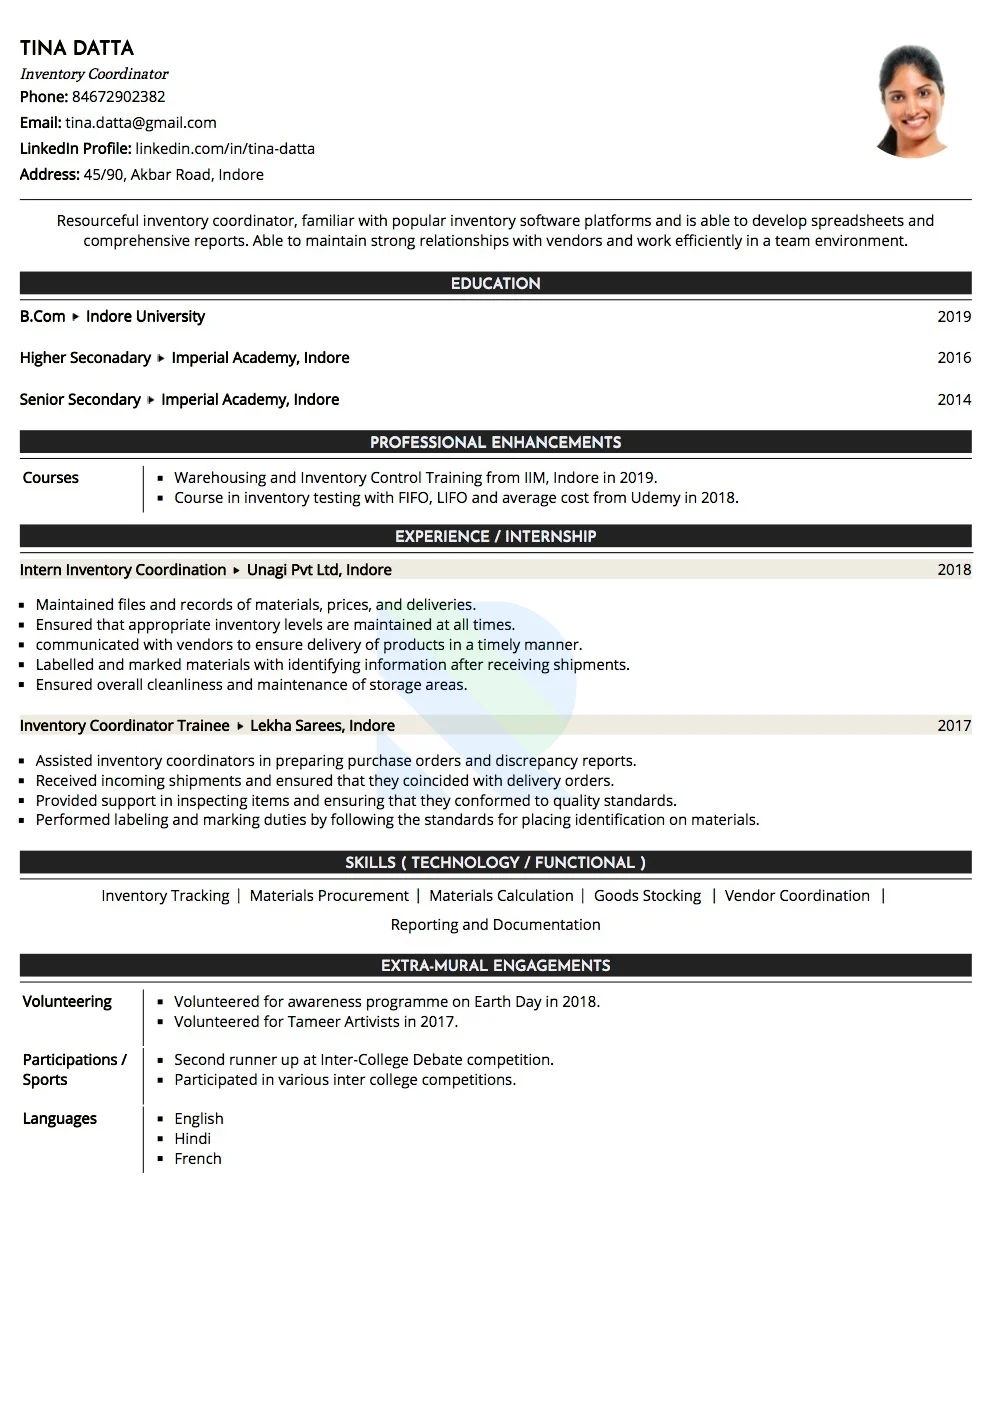 Sample Resume of Inventory Coordinator  | Free Resume Templates & Samples on Resumod.co